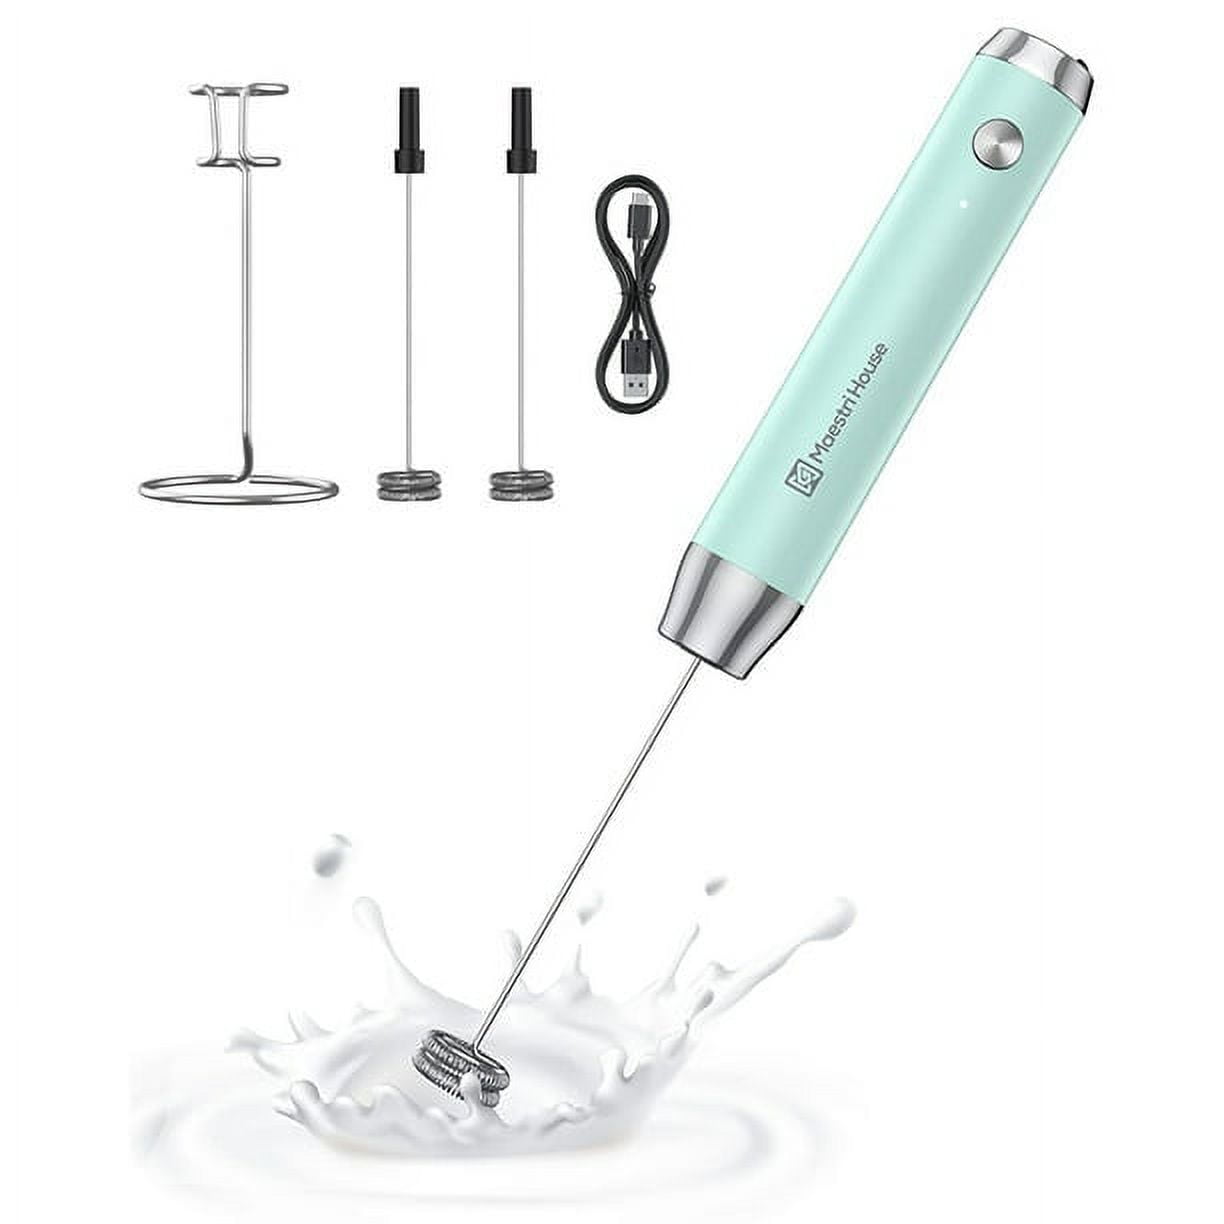 3-in-1 Rechargeable Electric Milk Frother and Drink Mixer – Mecco Shop